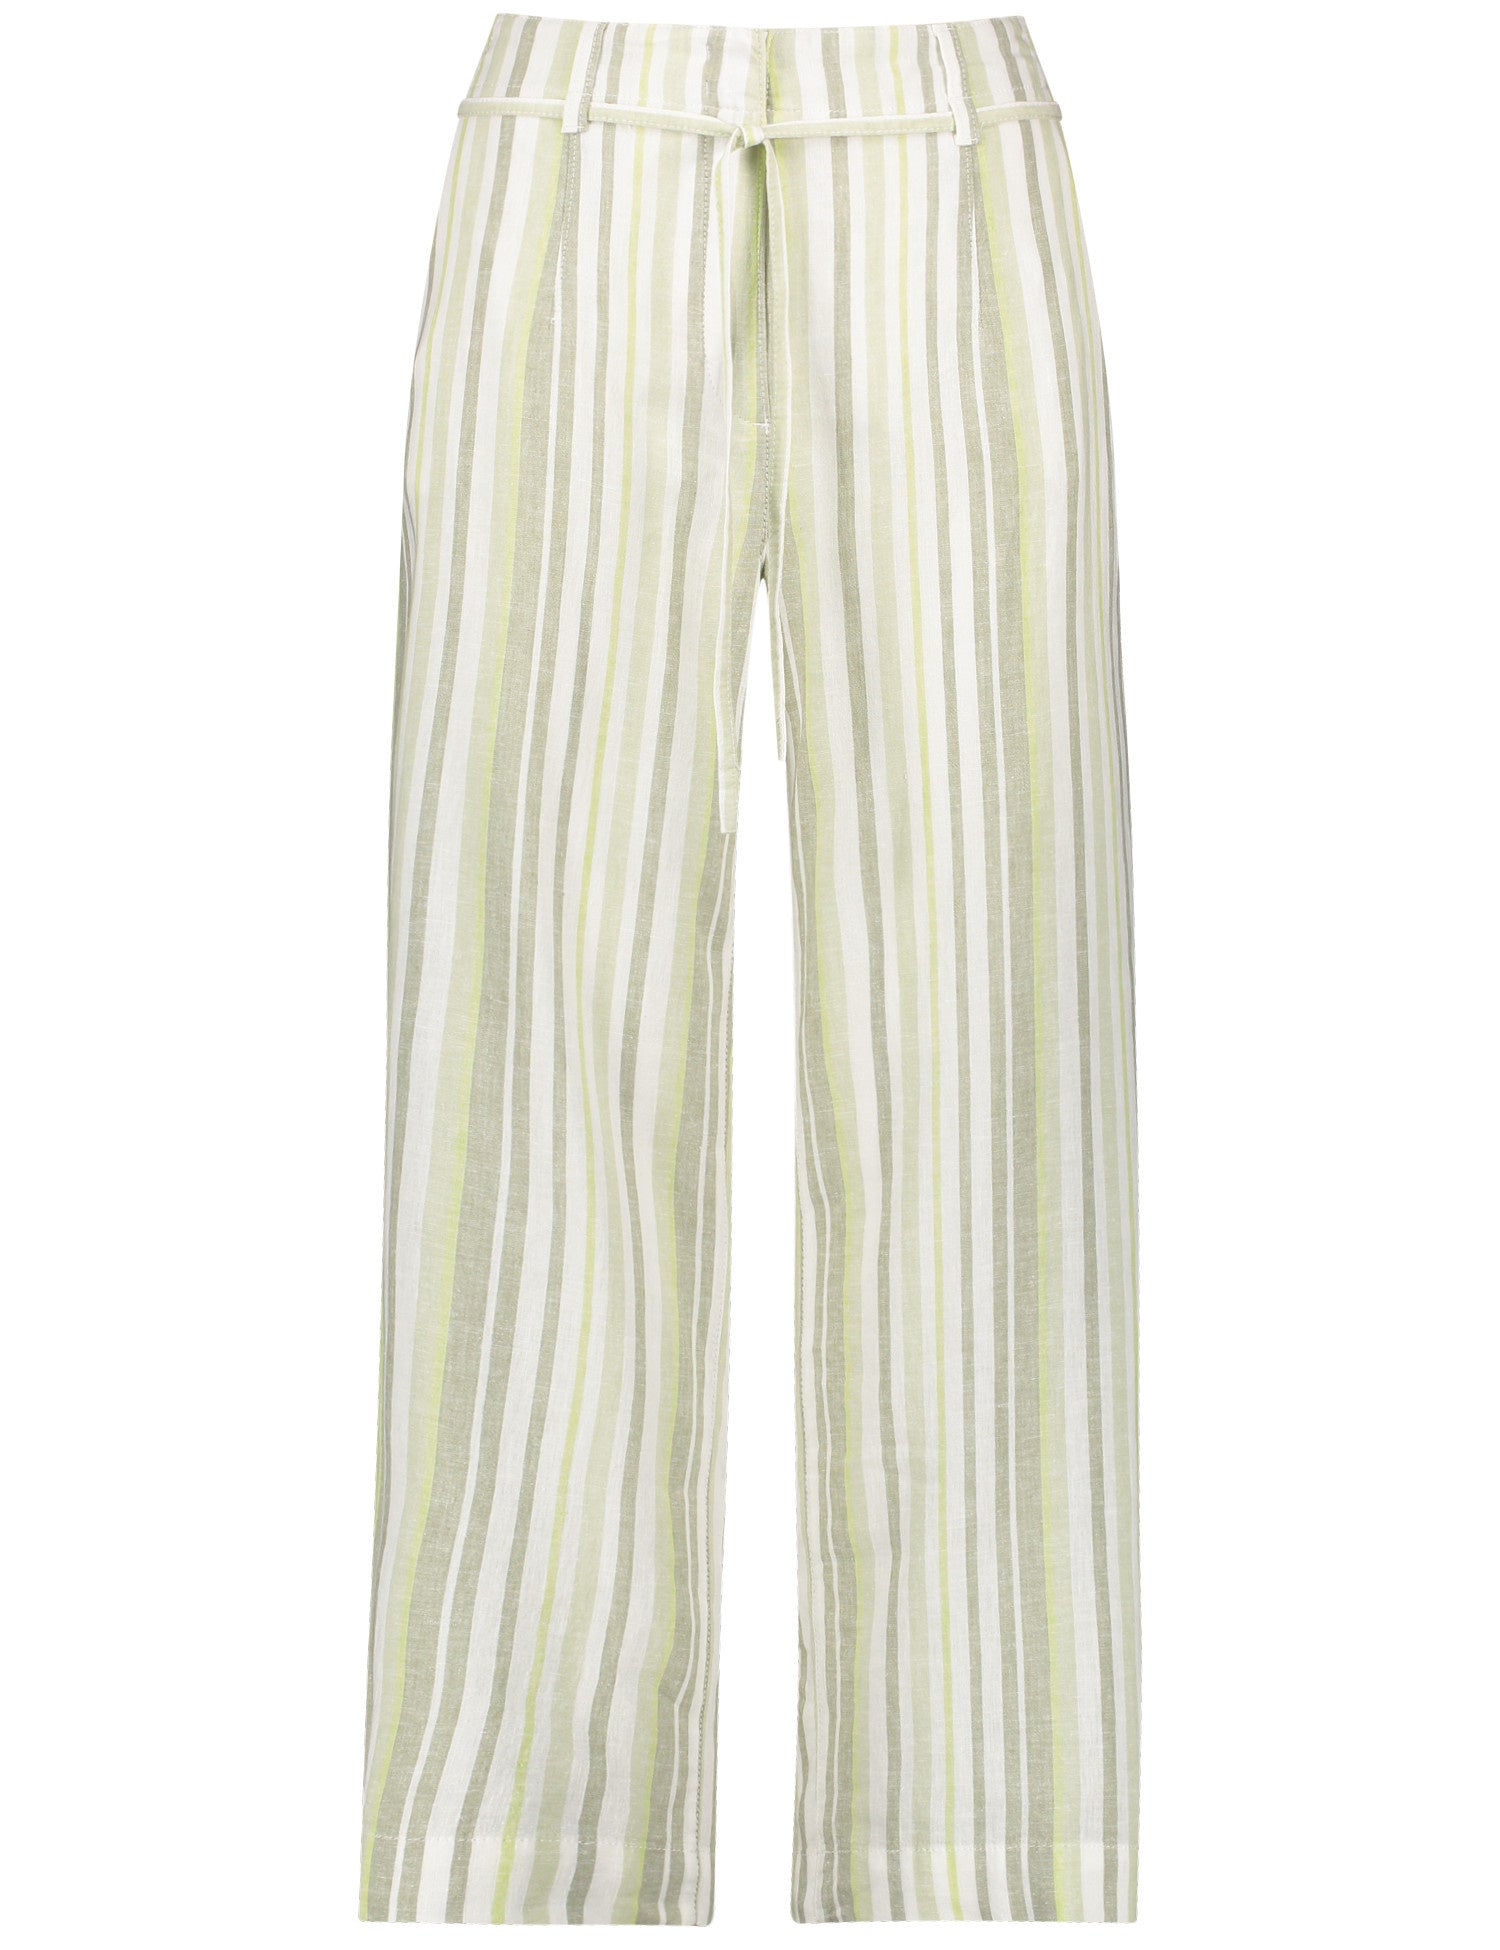 Striped Culottes Made Of Pure Linen